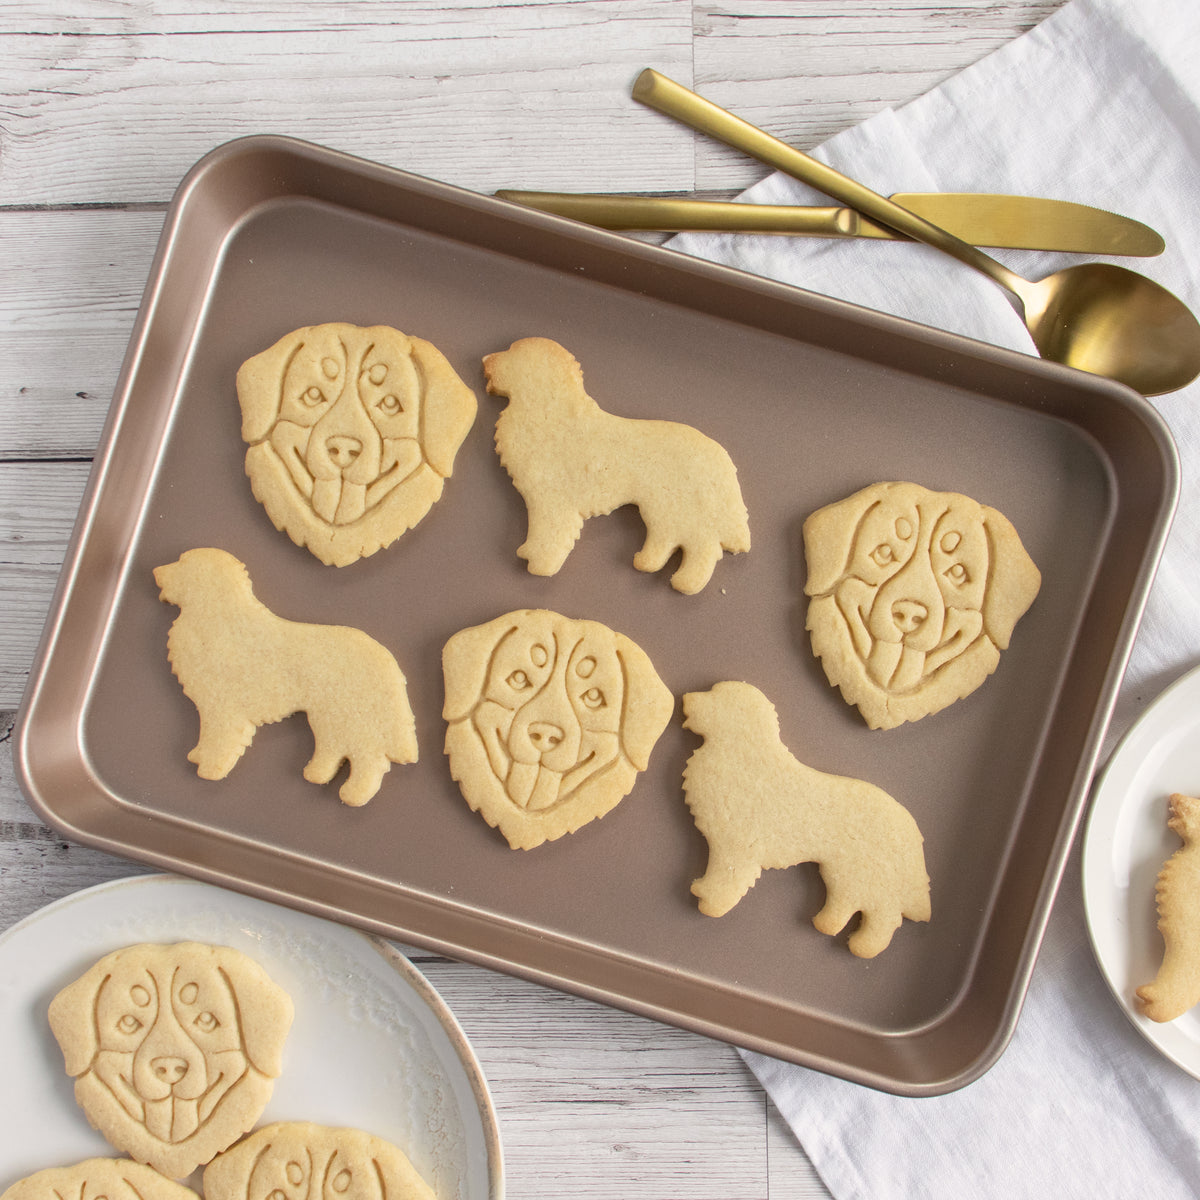 bernese mountain dog silhouette and portrait cookies